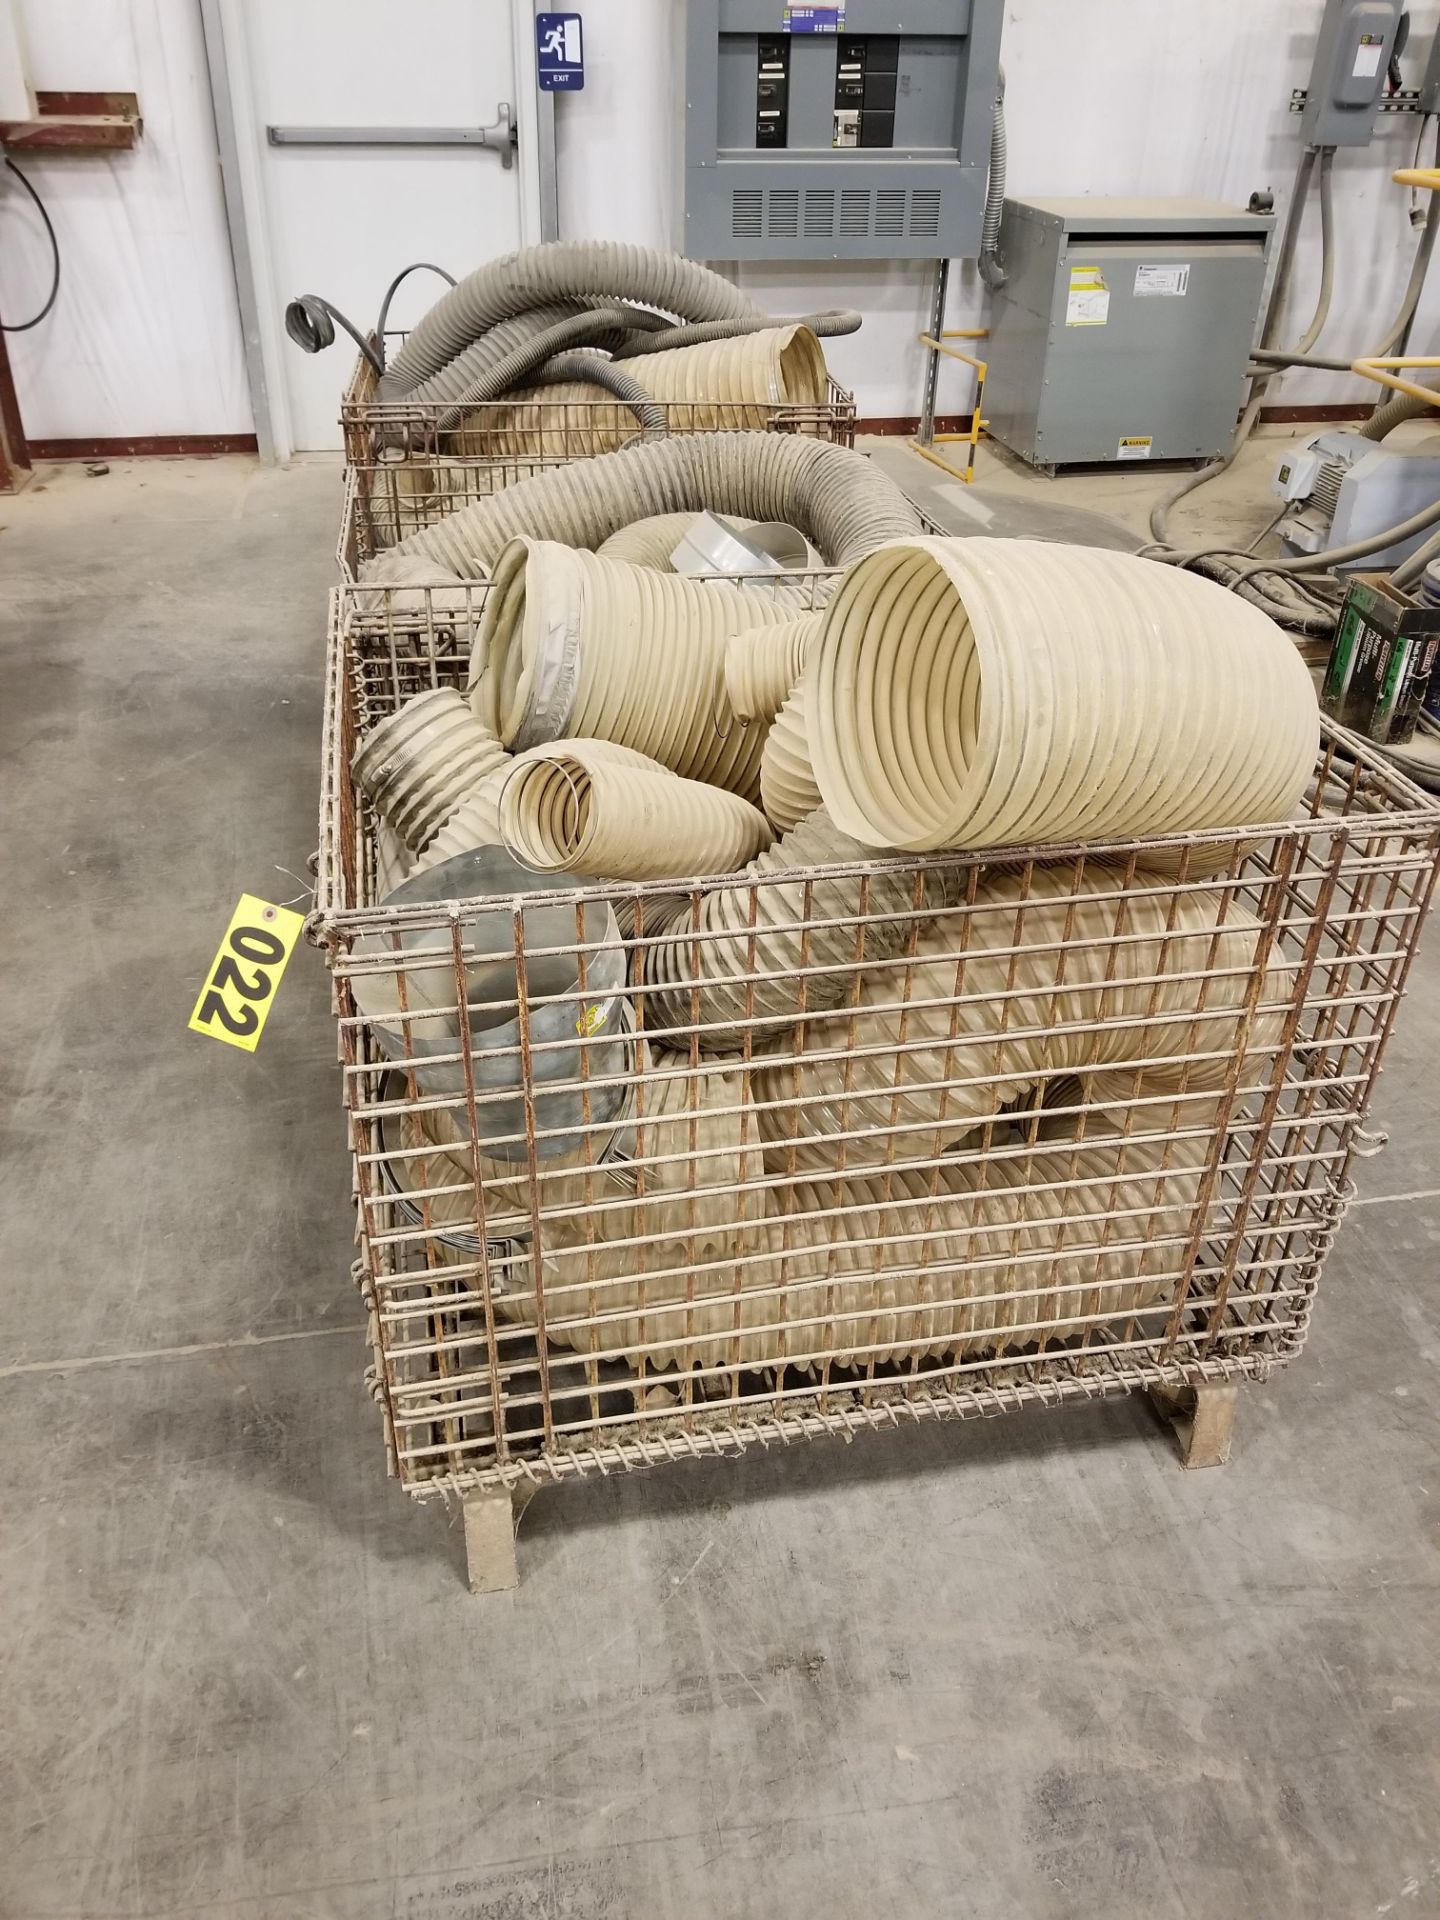 Wire bin w/ misc dust colletion hoses